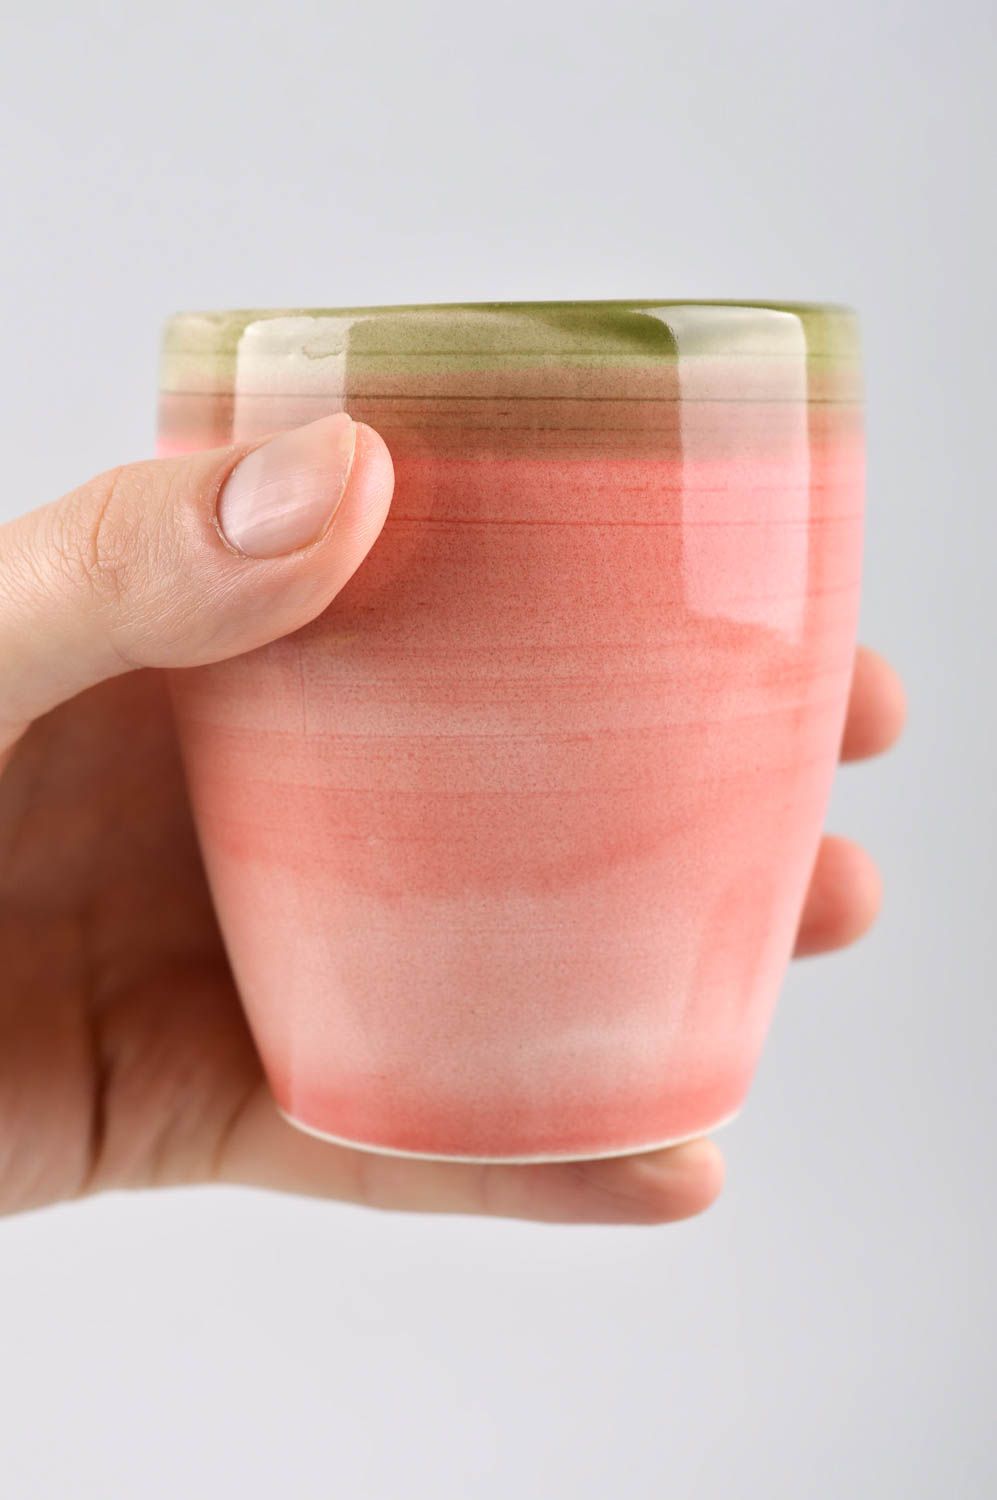 8 oz porcelain handmade art ceramic cup in pink color and light green glaze photo 5